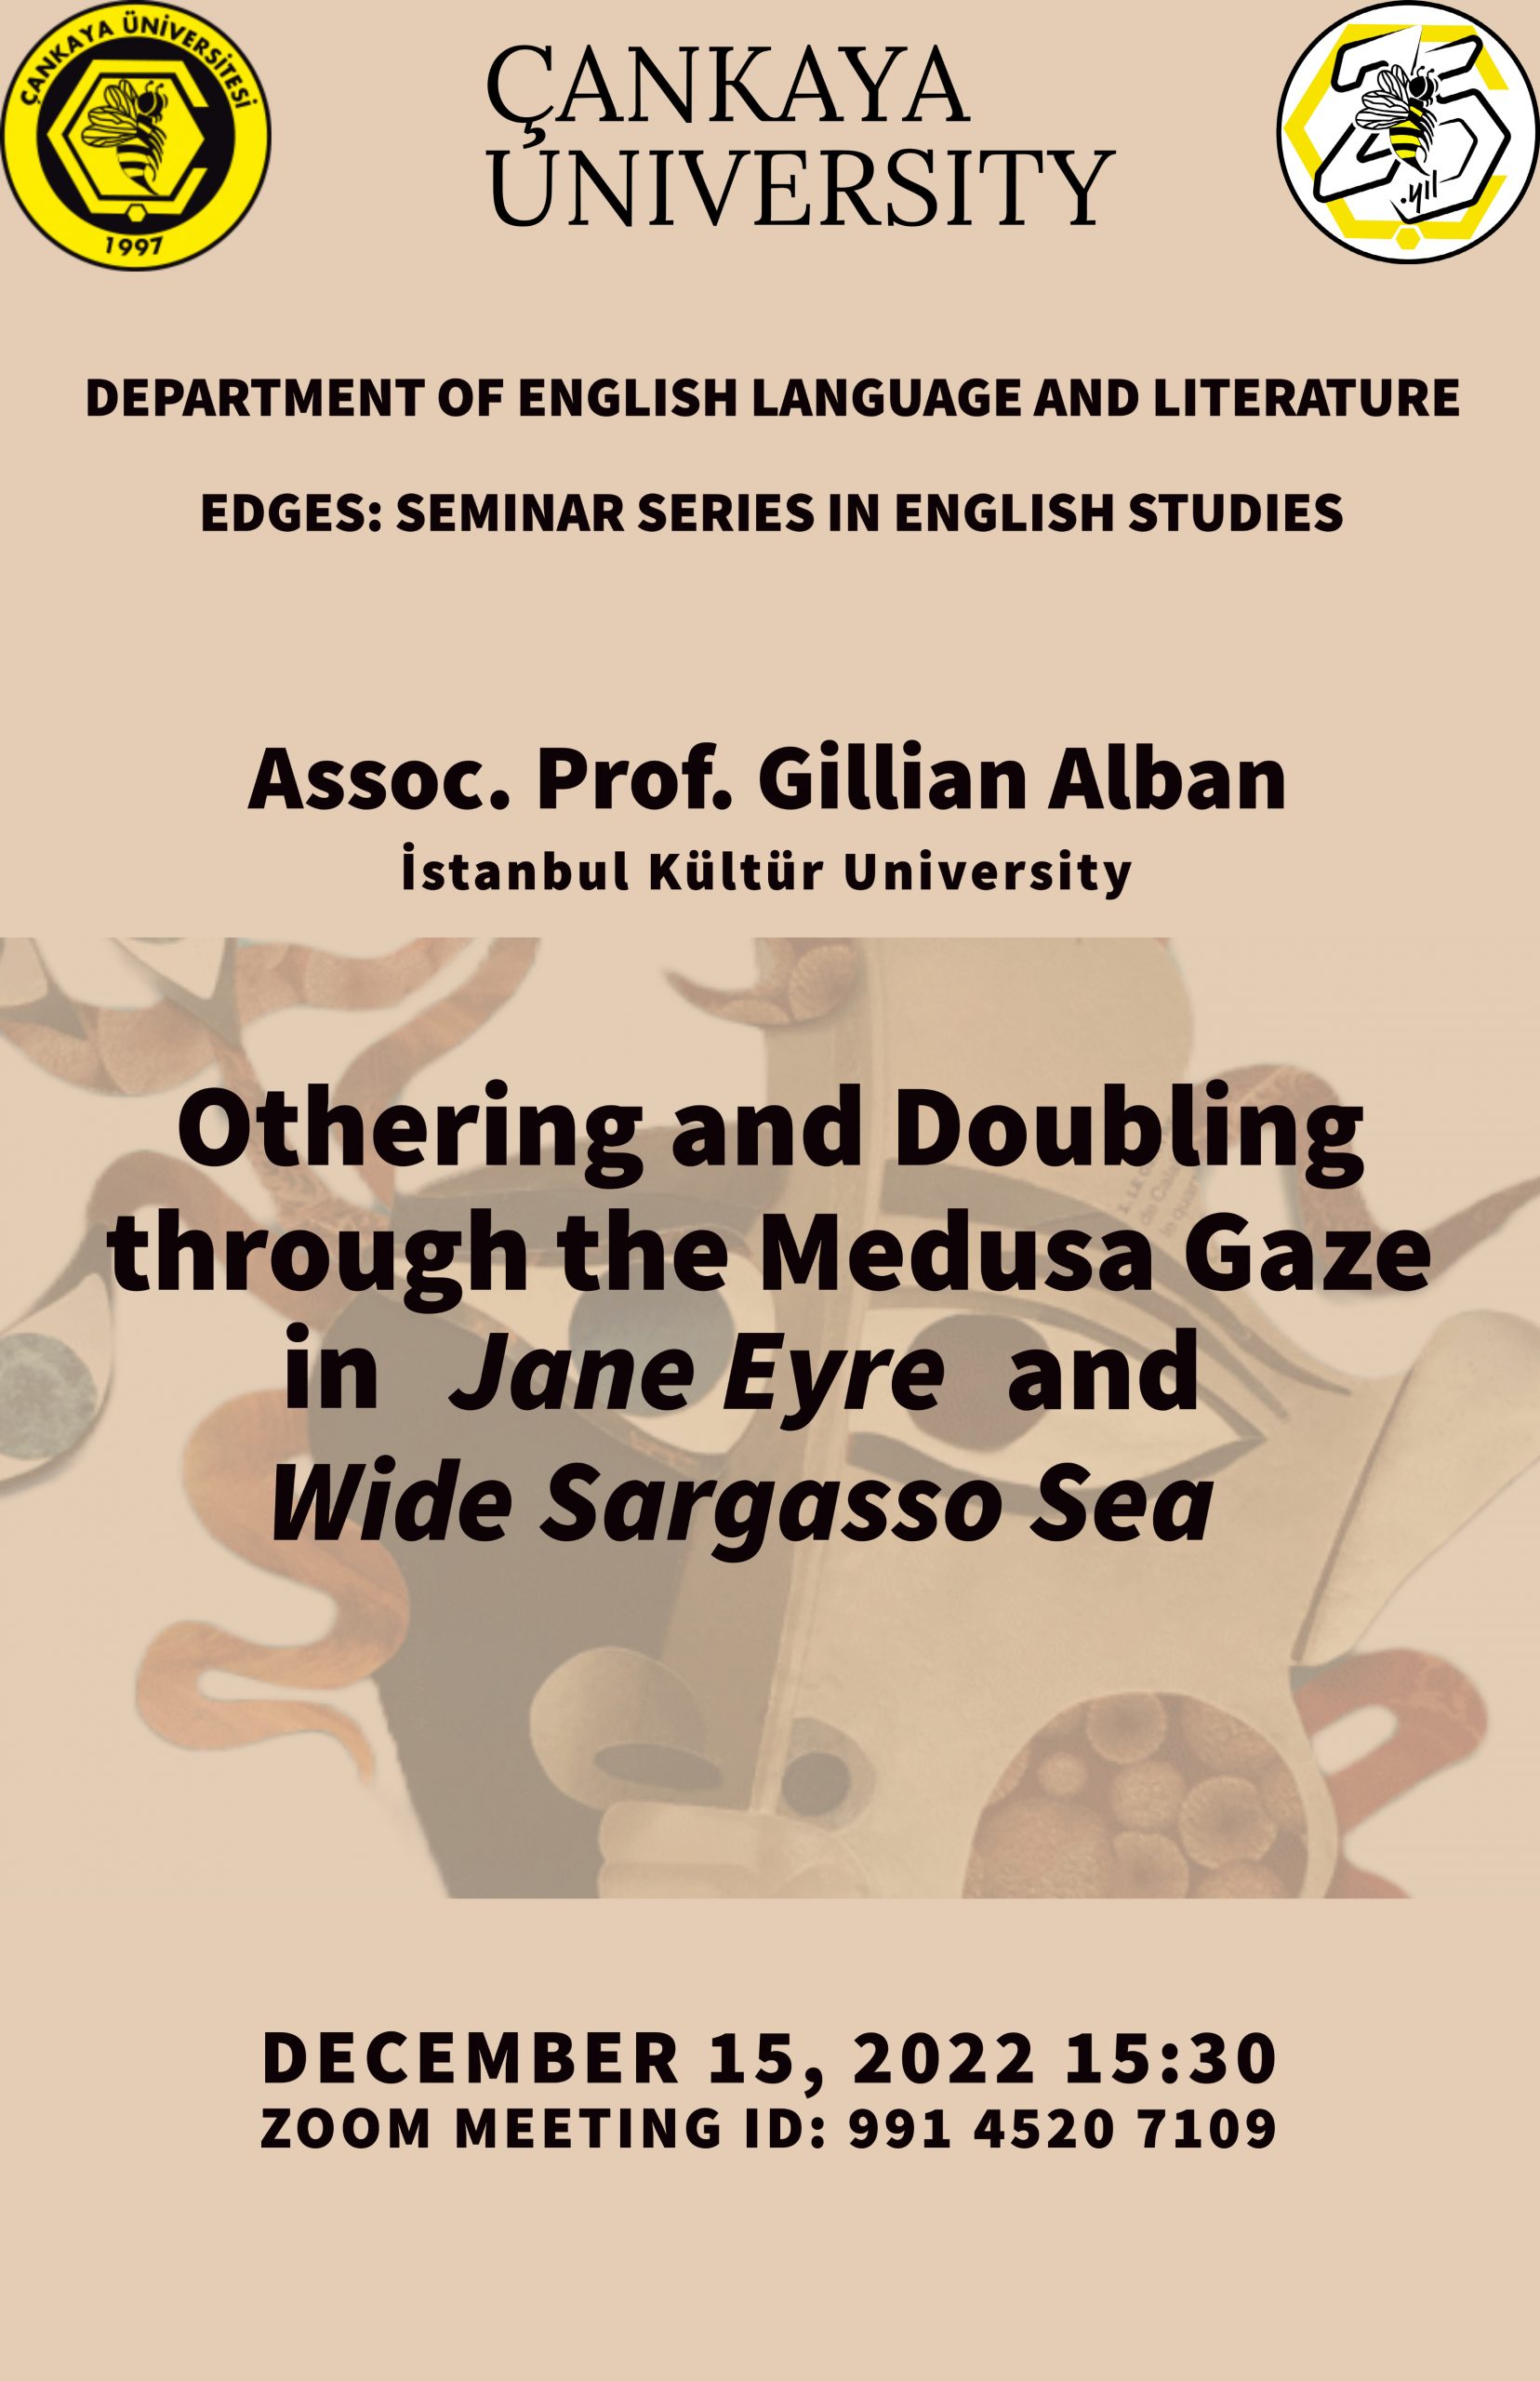 Edges Seminar Series: “Othering and Doubling through the Medusa Gaze in ‘Jane Eyre’ and ‘Wide Sargasso Sea'”